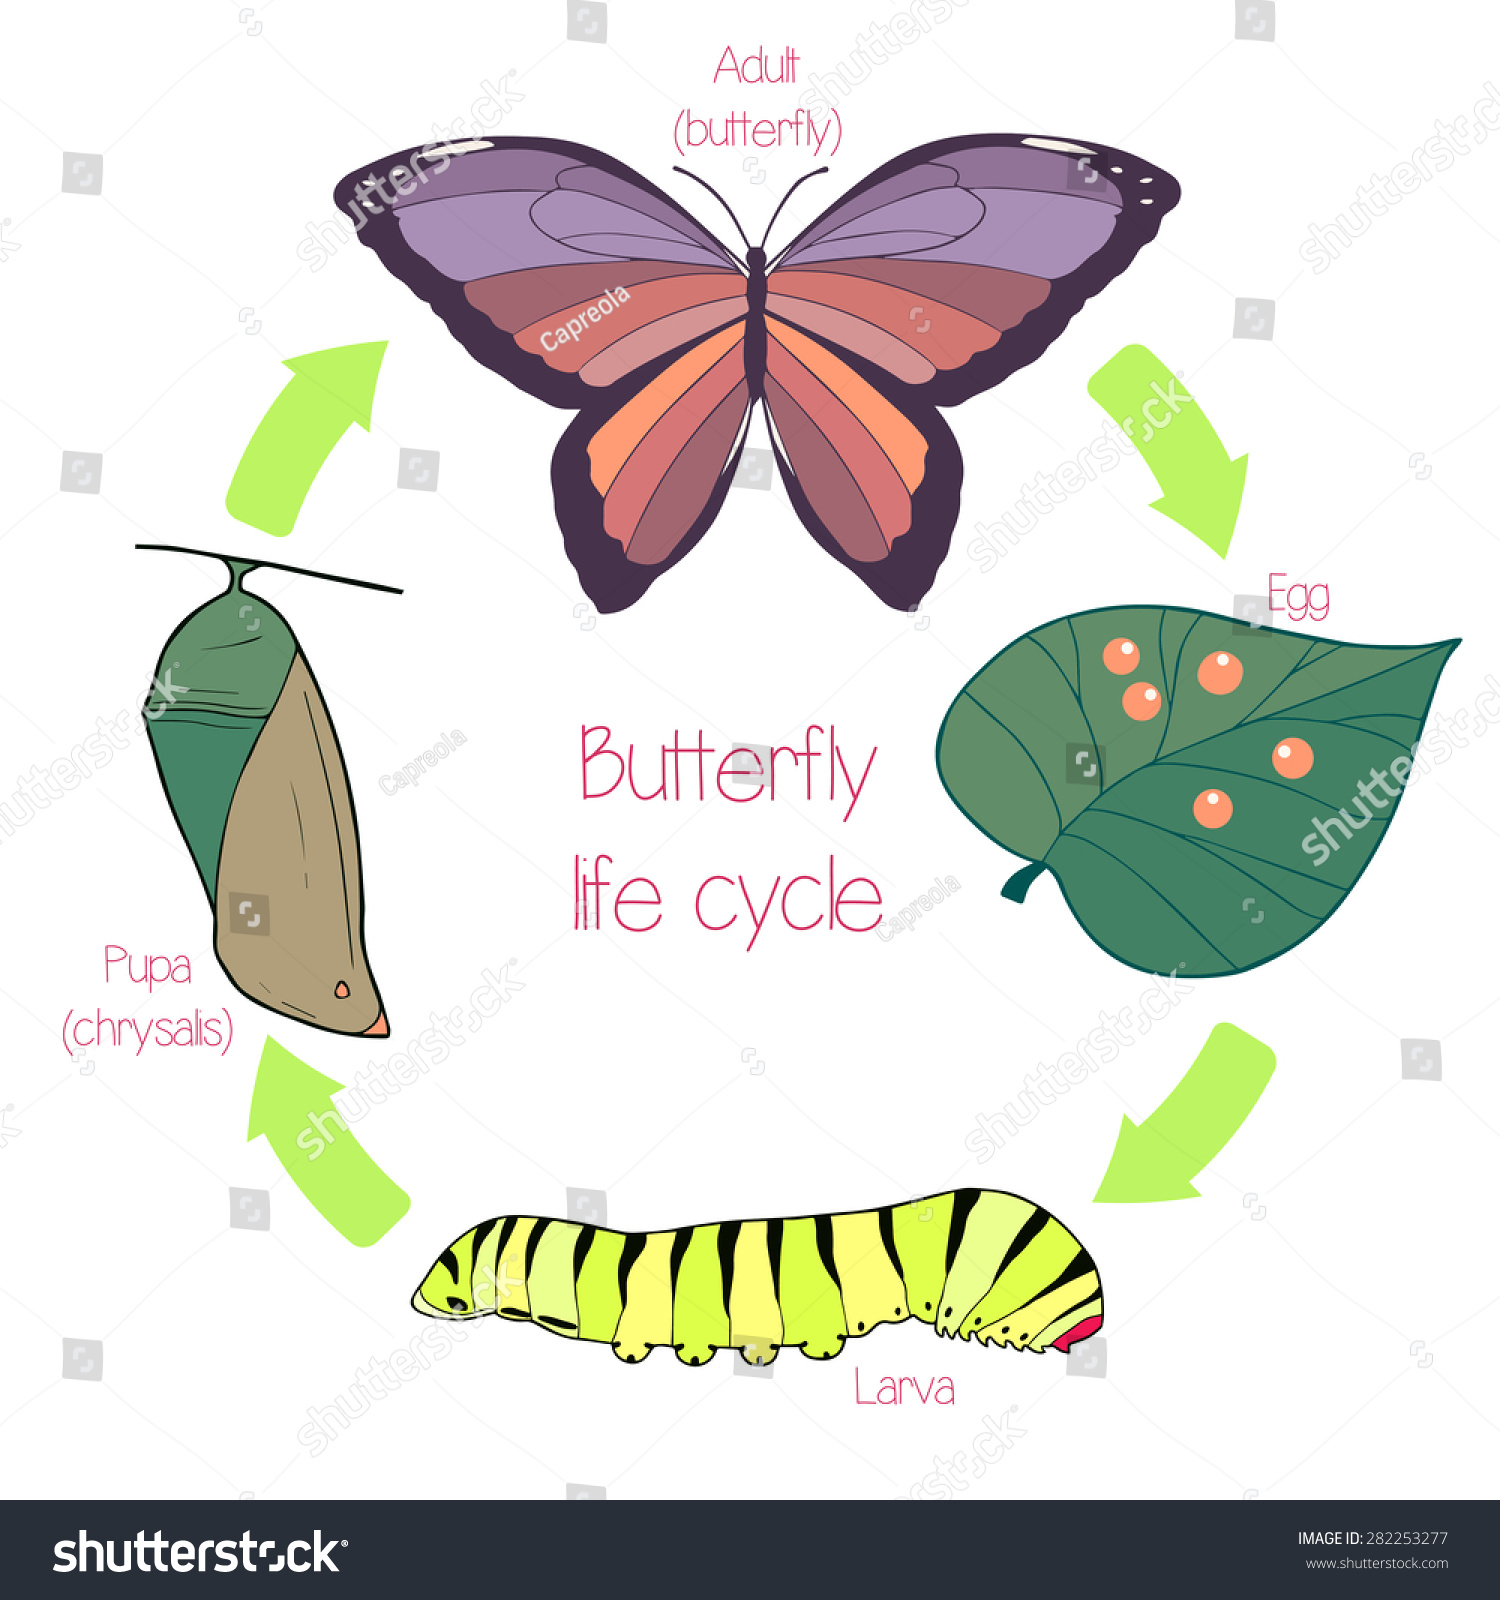 free clip art butterfly life cycle - photo #33